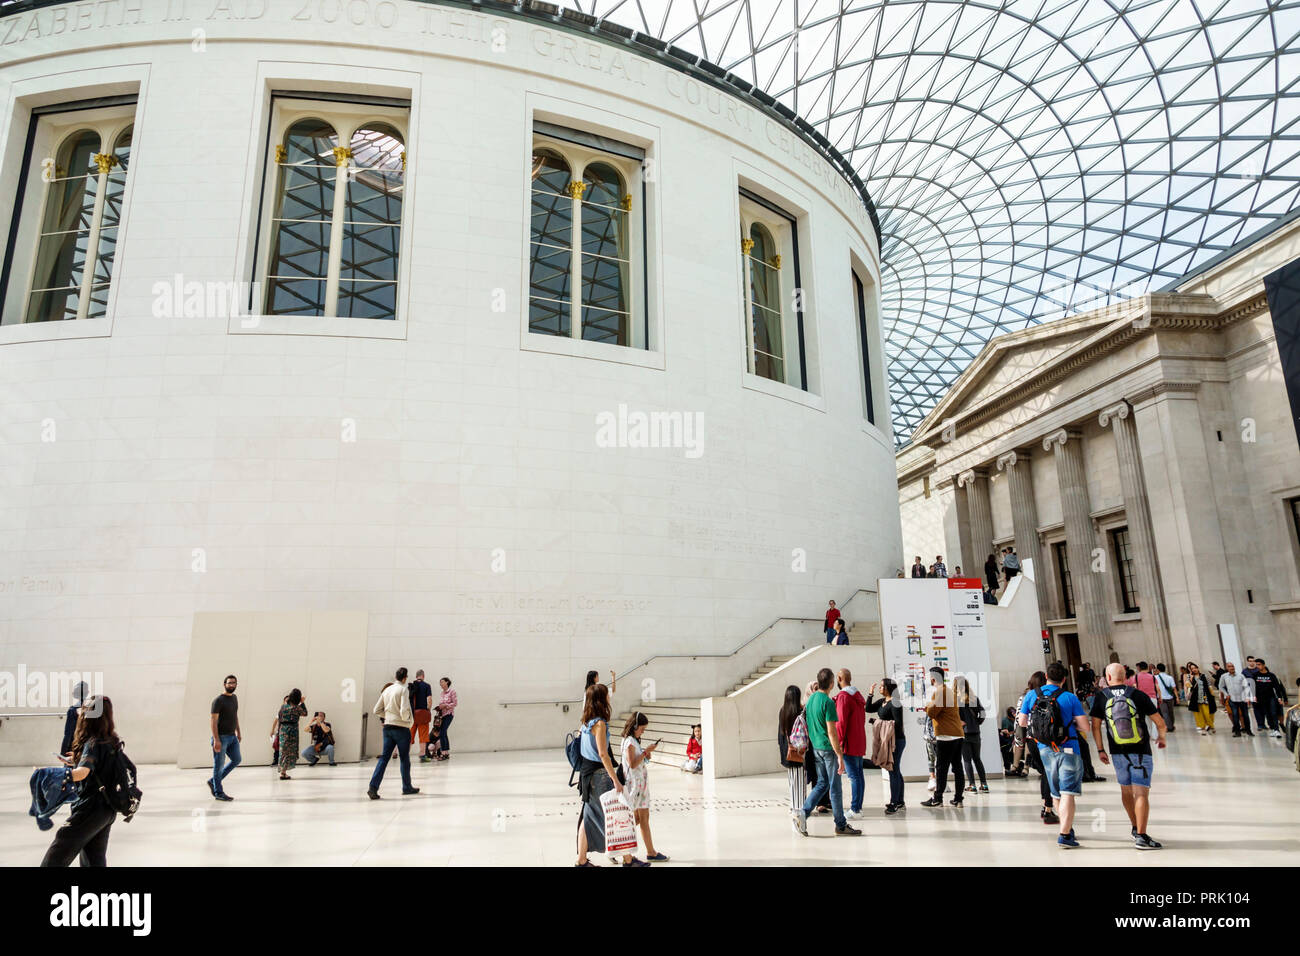 London England,UK,Bloomsbury,The British Museum,human culture history,interior inside,Great Court,central quadrangle,glass roof,designed by Buro Happo Stock Photo